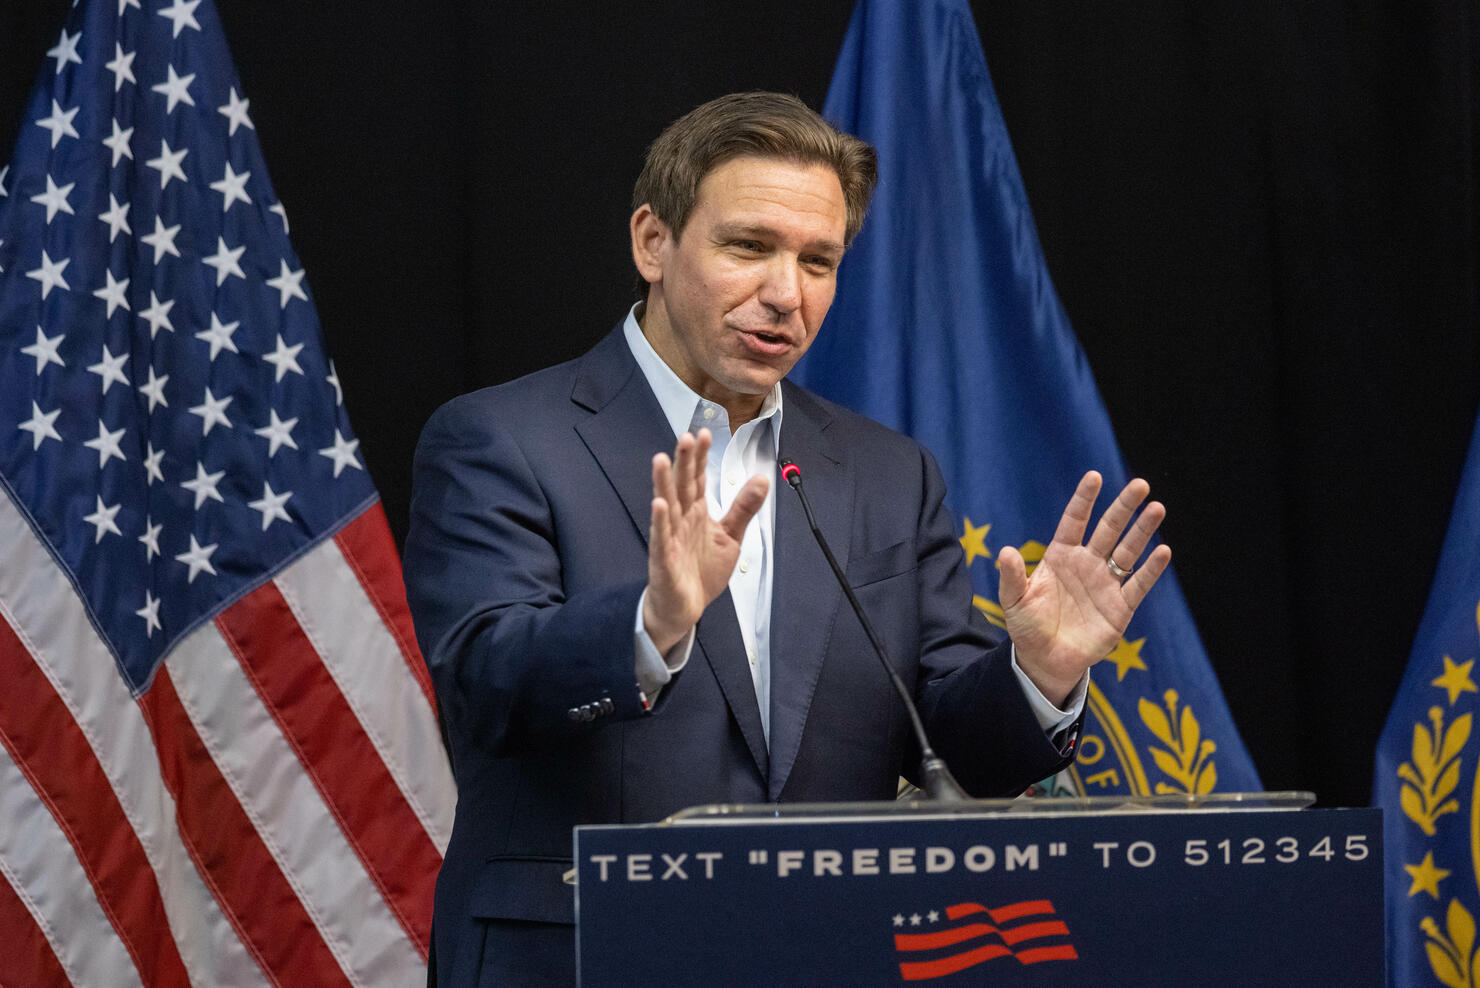 Ron DeSantis Makes First Trip To New Hampshire As Presidential Candidate